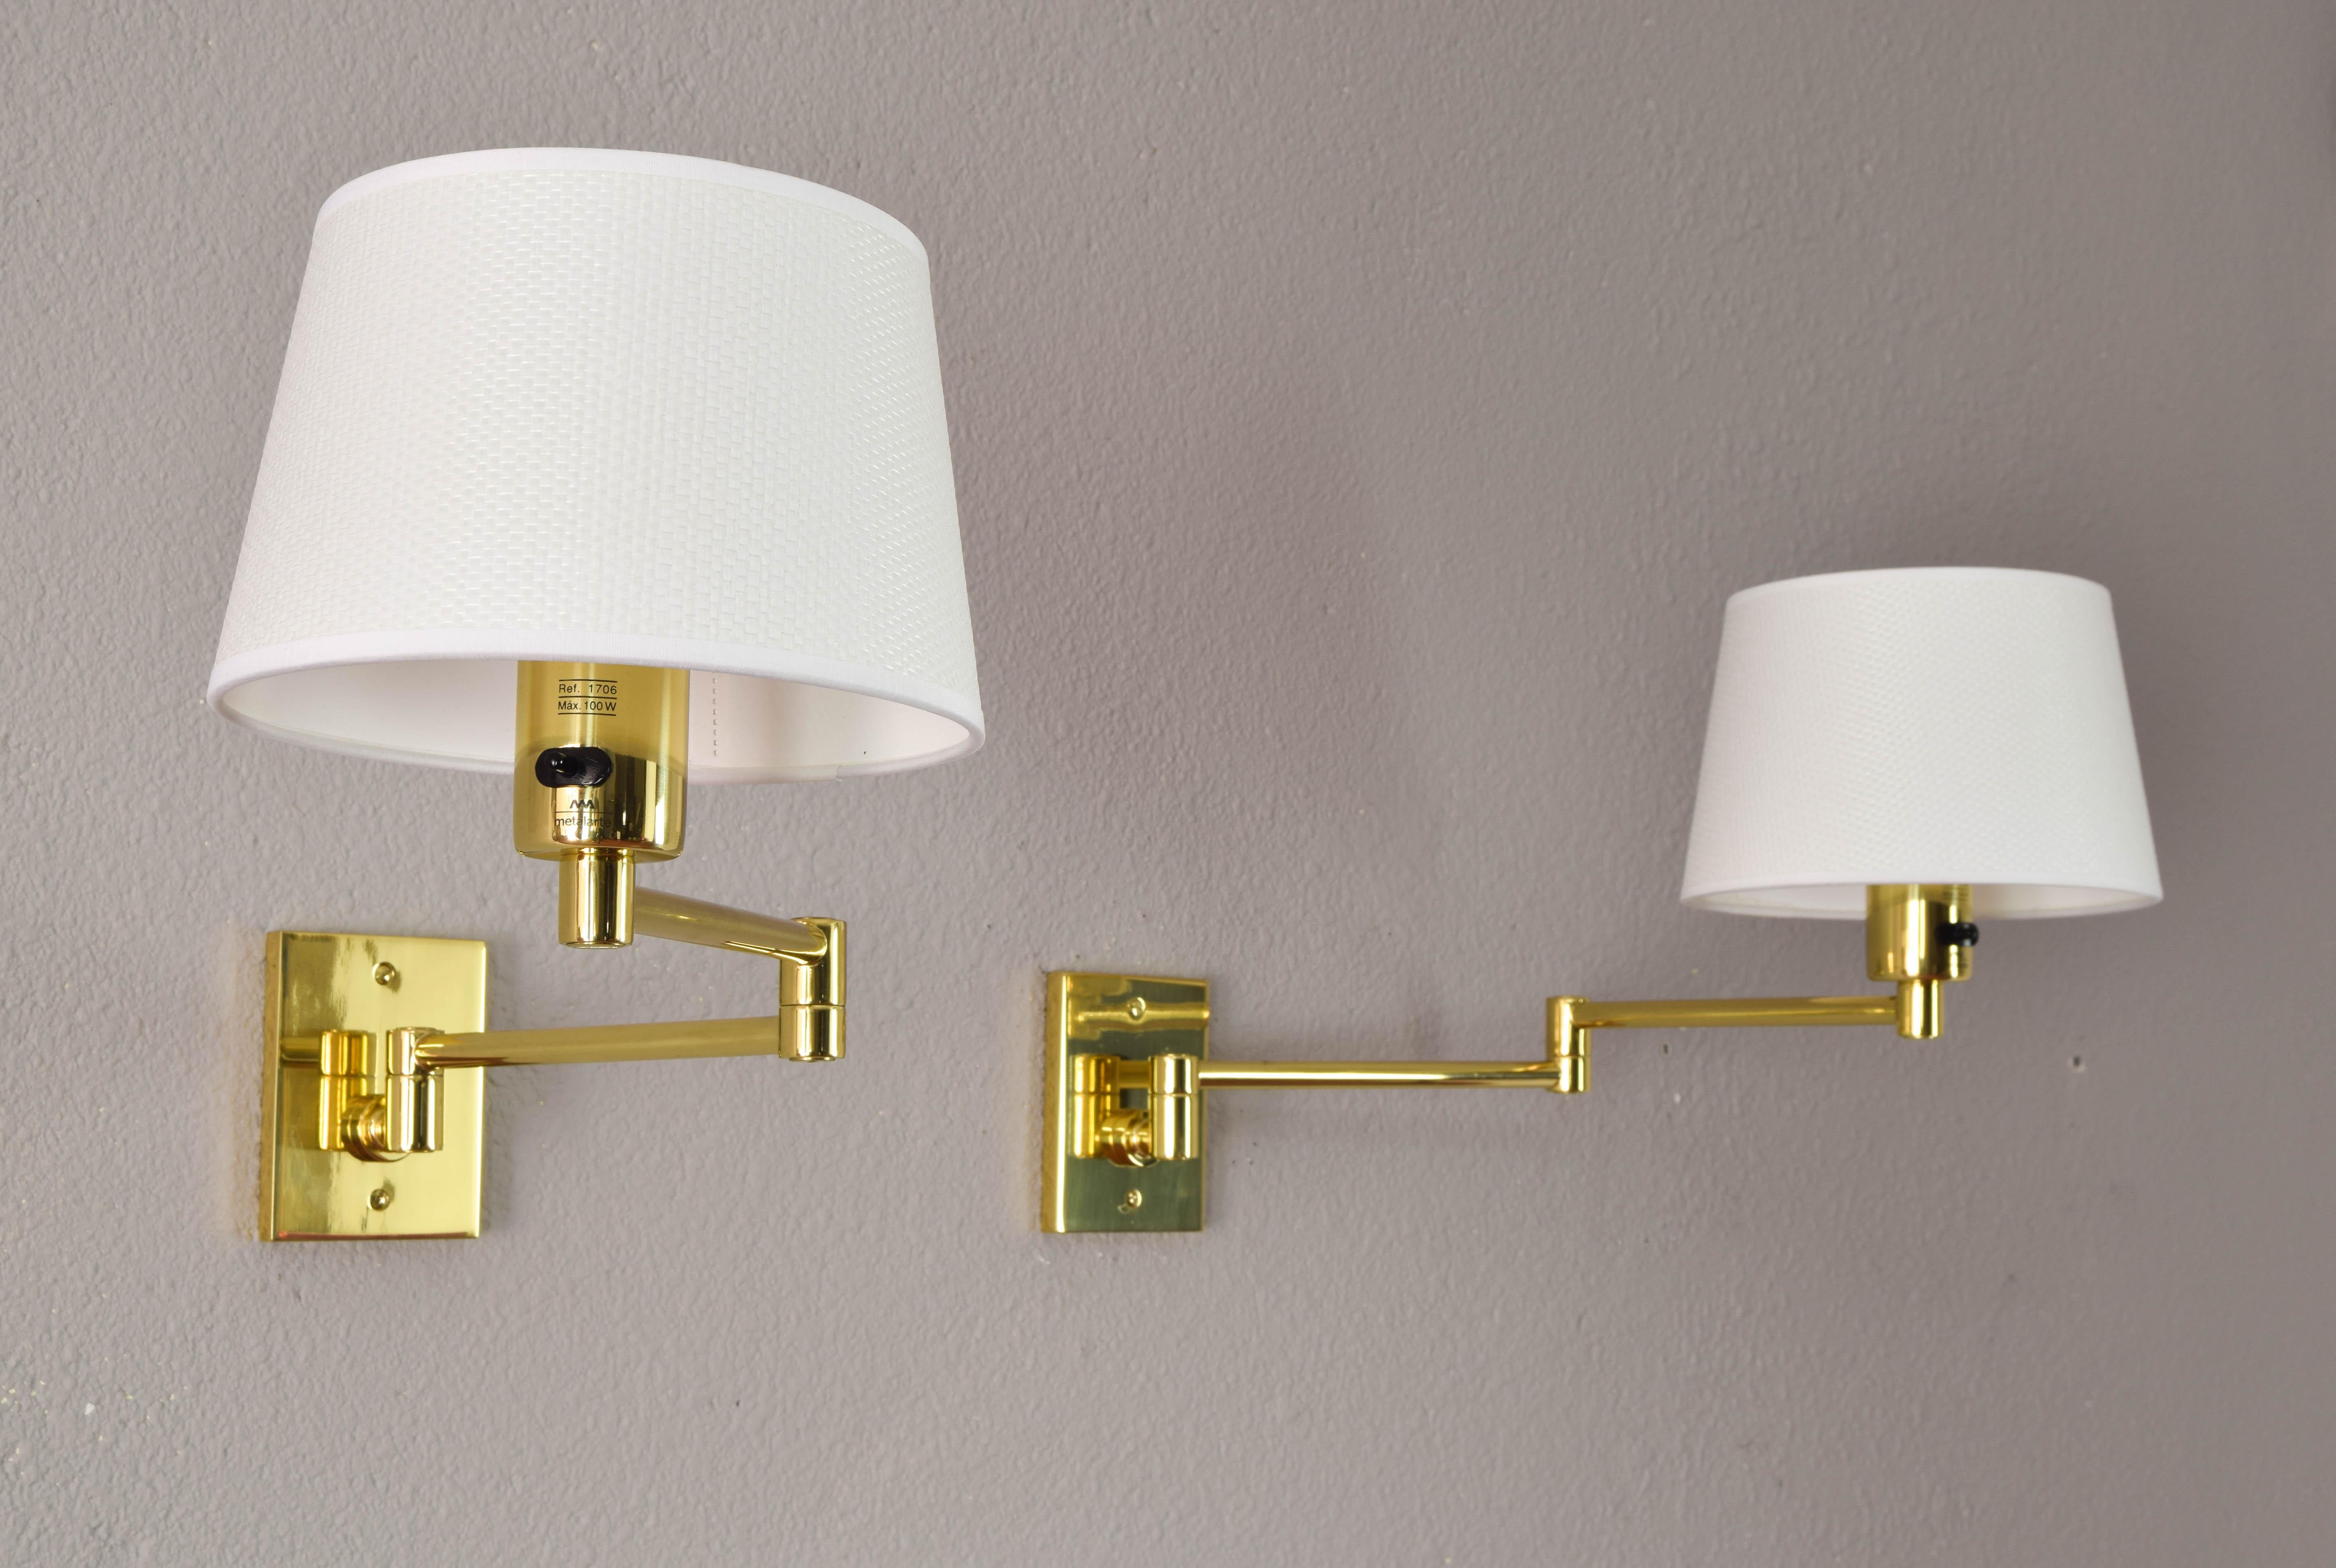 20th Century Two Mid-Century Modern Swing Arm Brass Sconces by George W Hansen for Metalarte